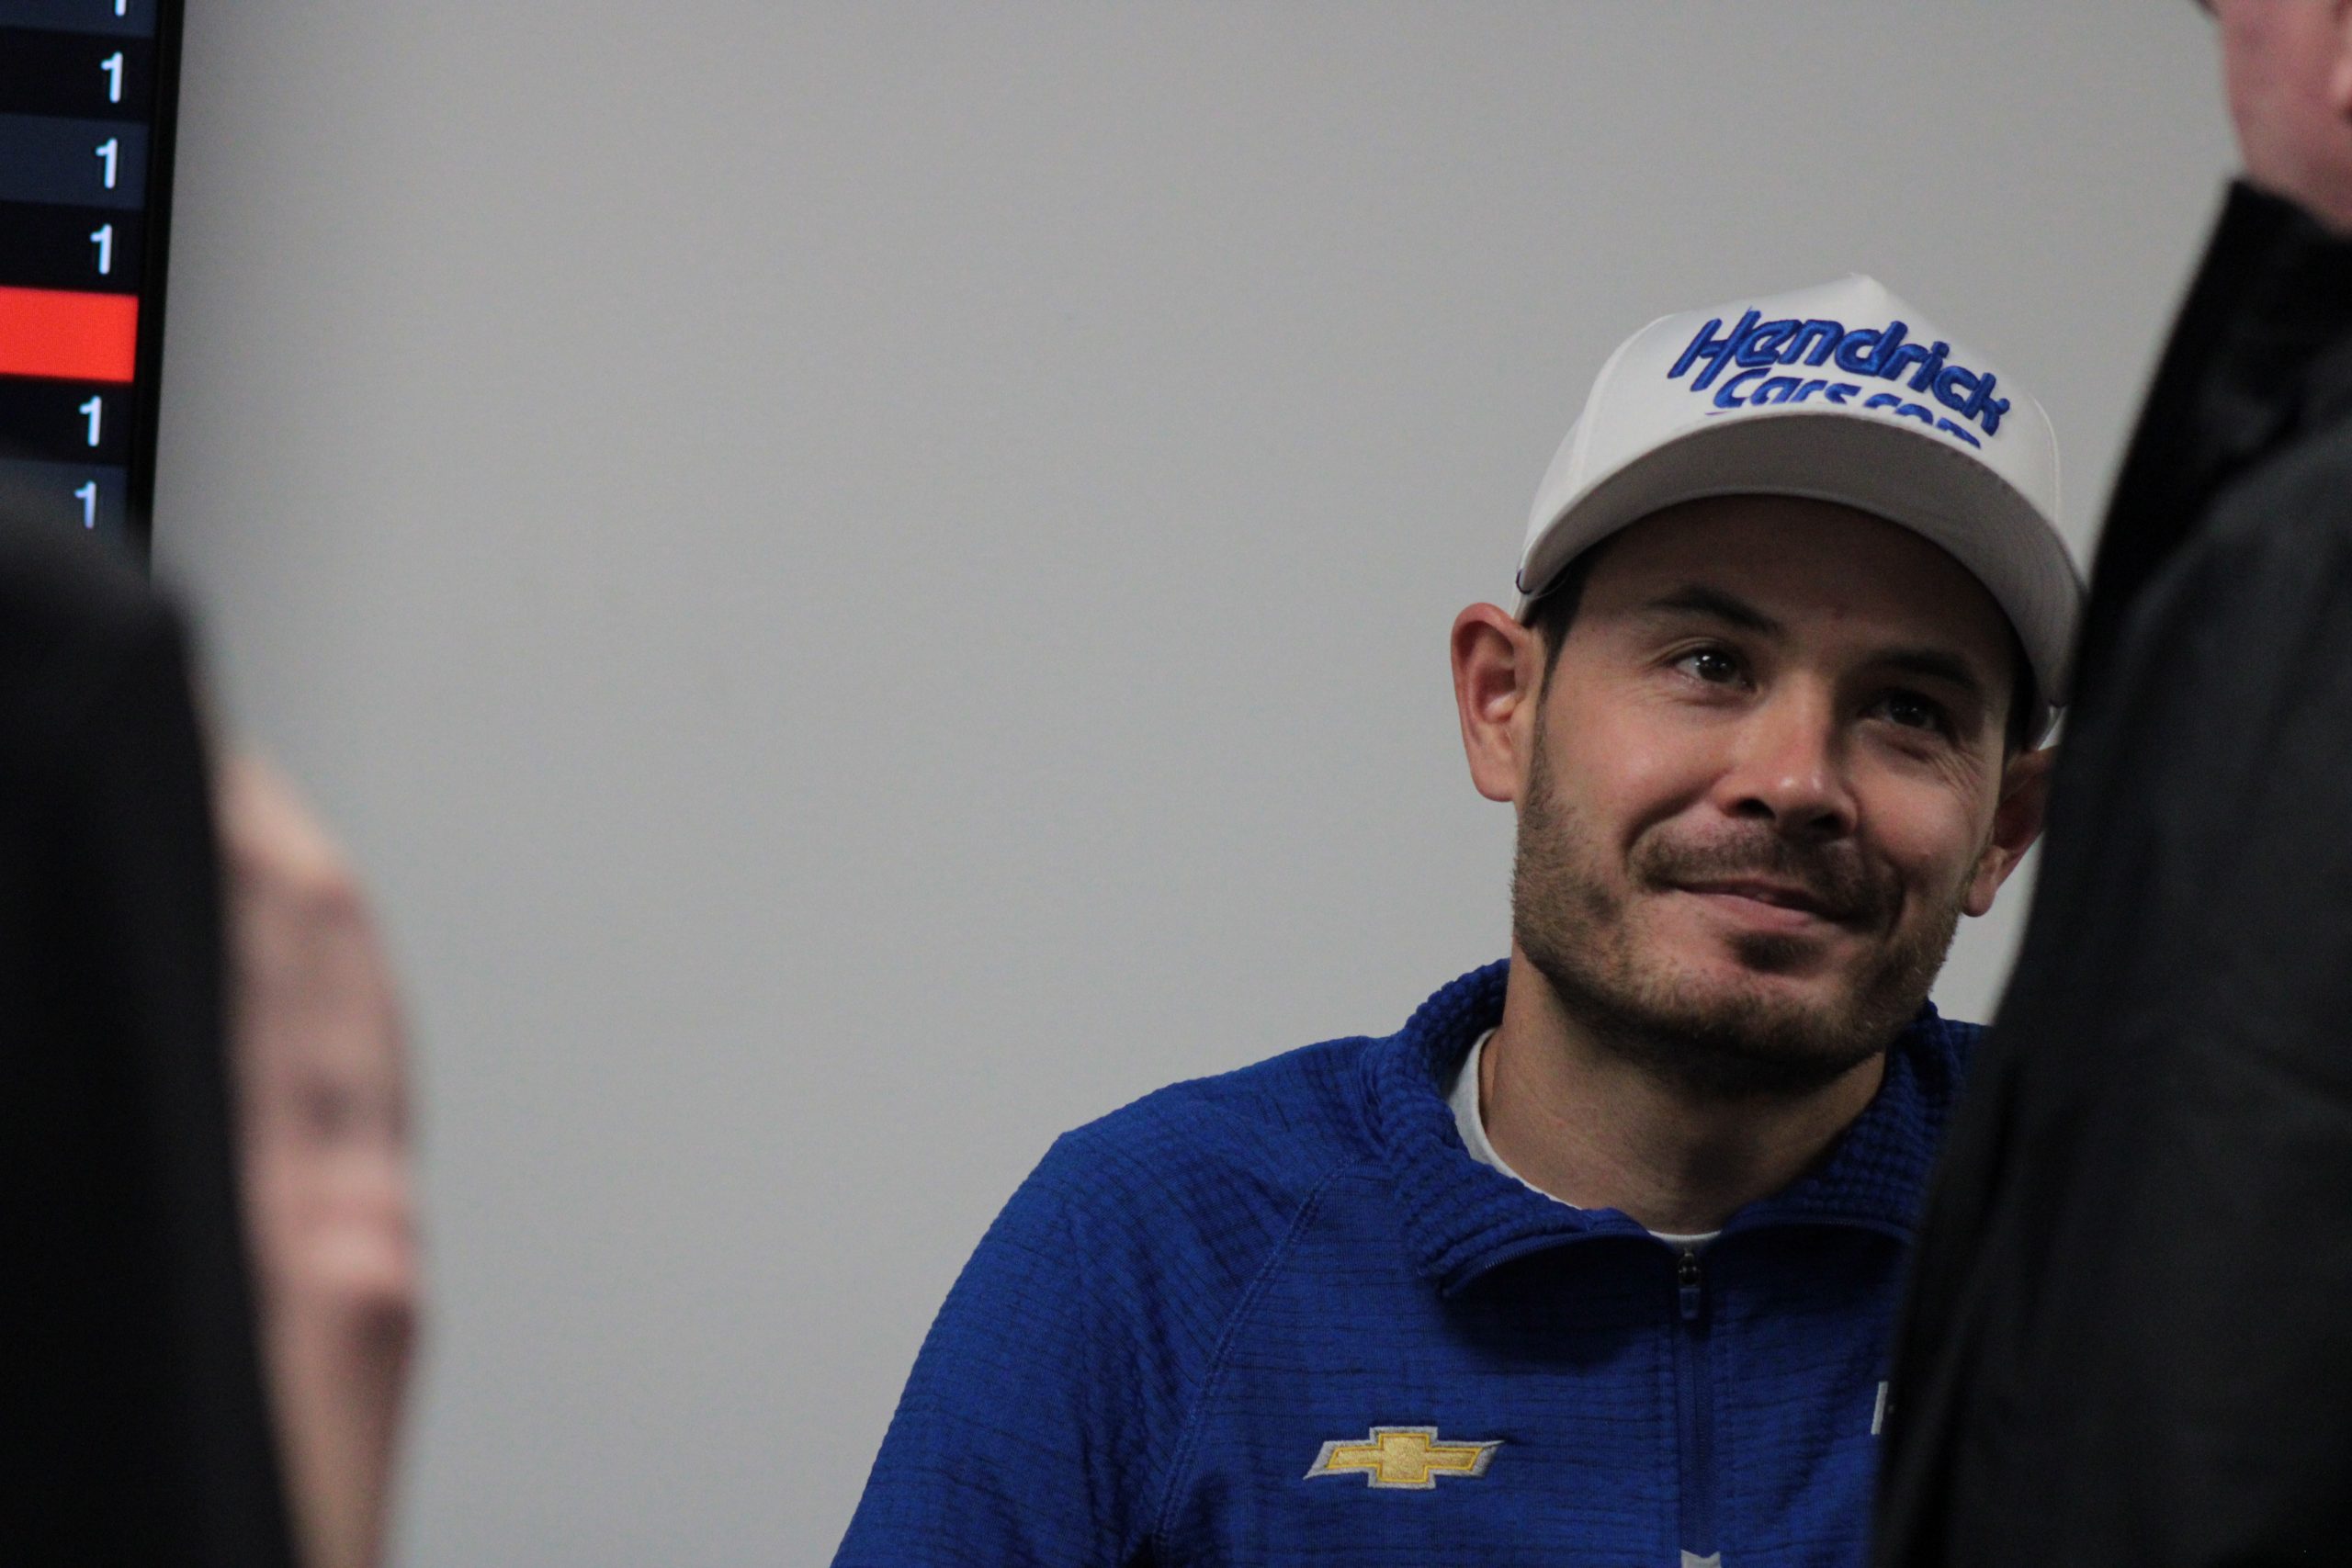 Kyle Larson hopes for better results at Richmond Raceway after middling finishes last year. (Photo: Trish McCormack | The Podium Finish)